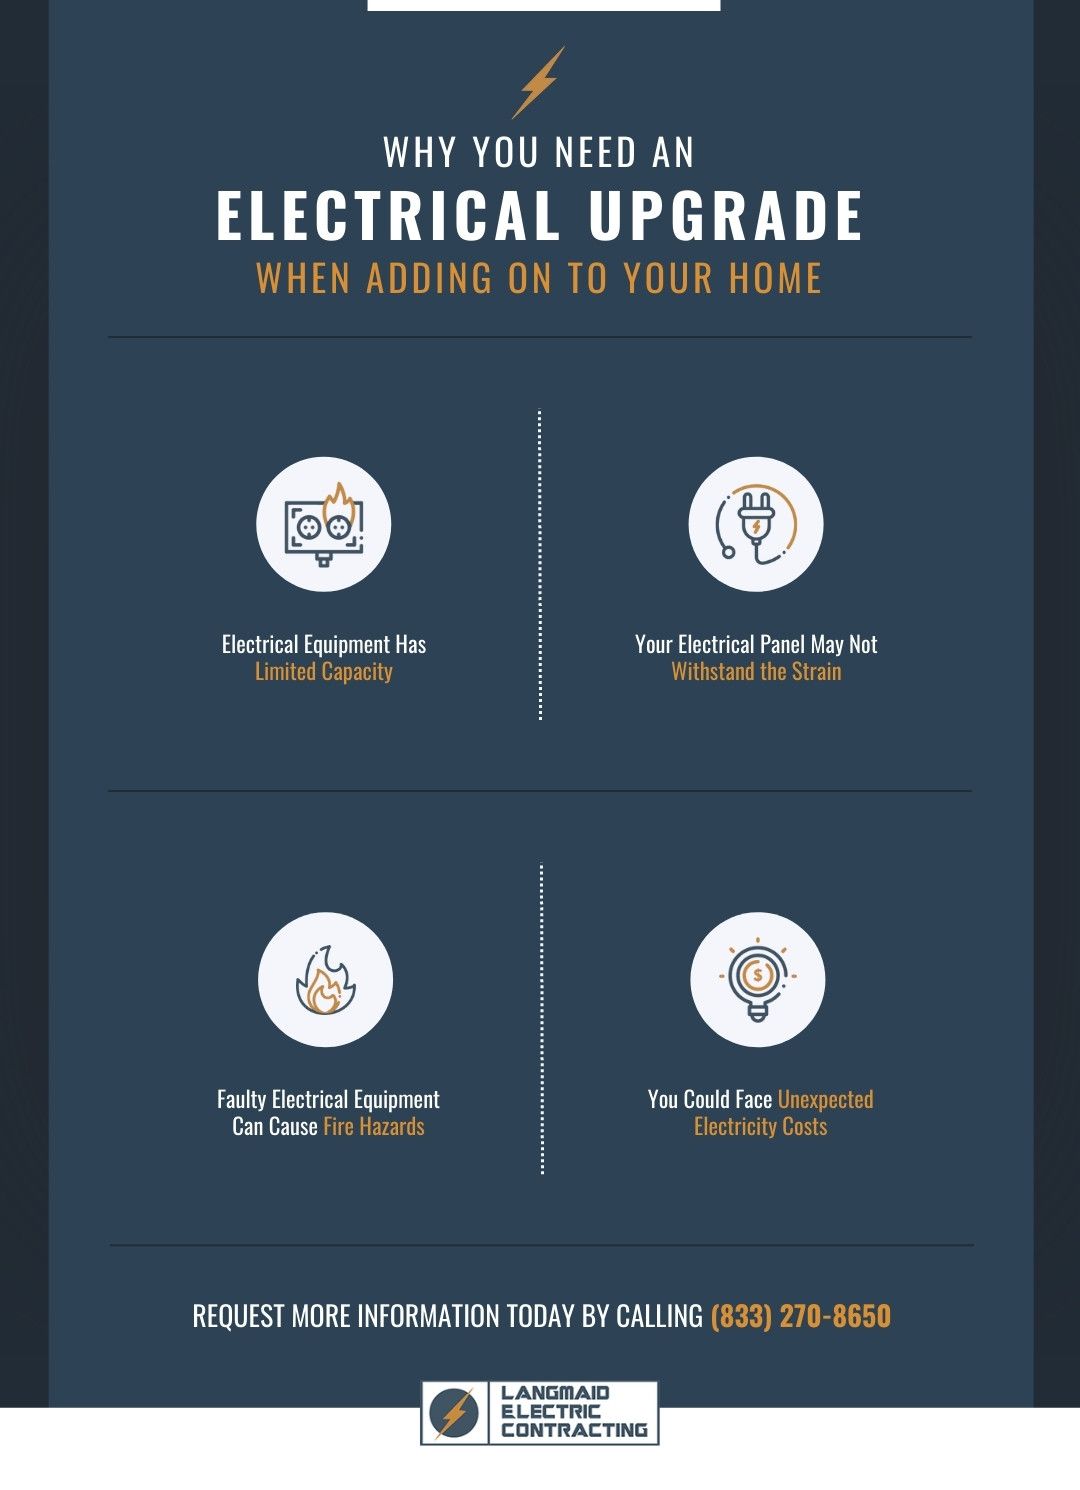 C1406 - Langmaid Electric - Infographic - Why You Need an Electrical Upgrade When Adding on to Your Home.jpg